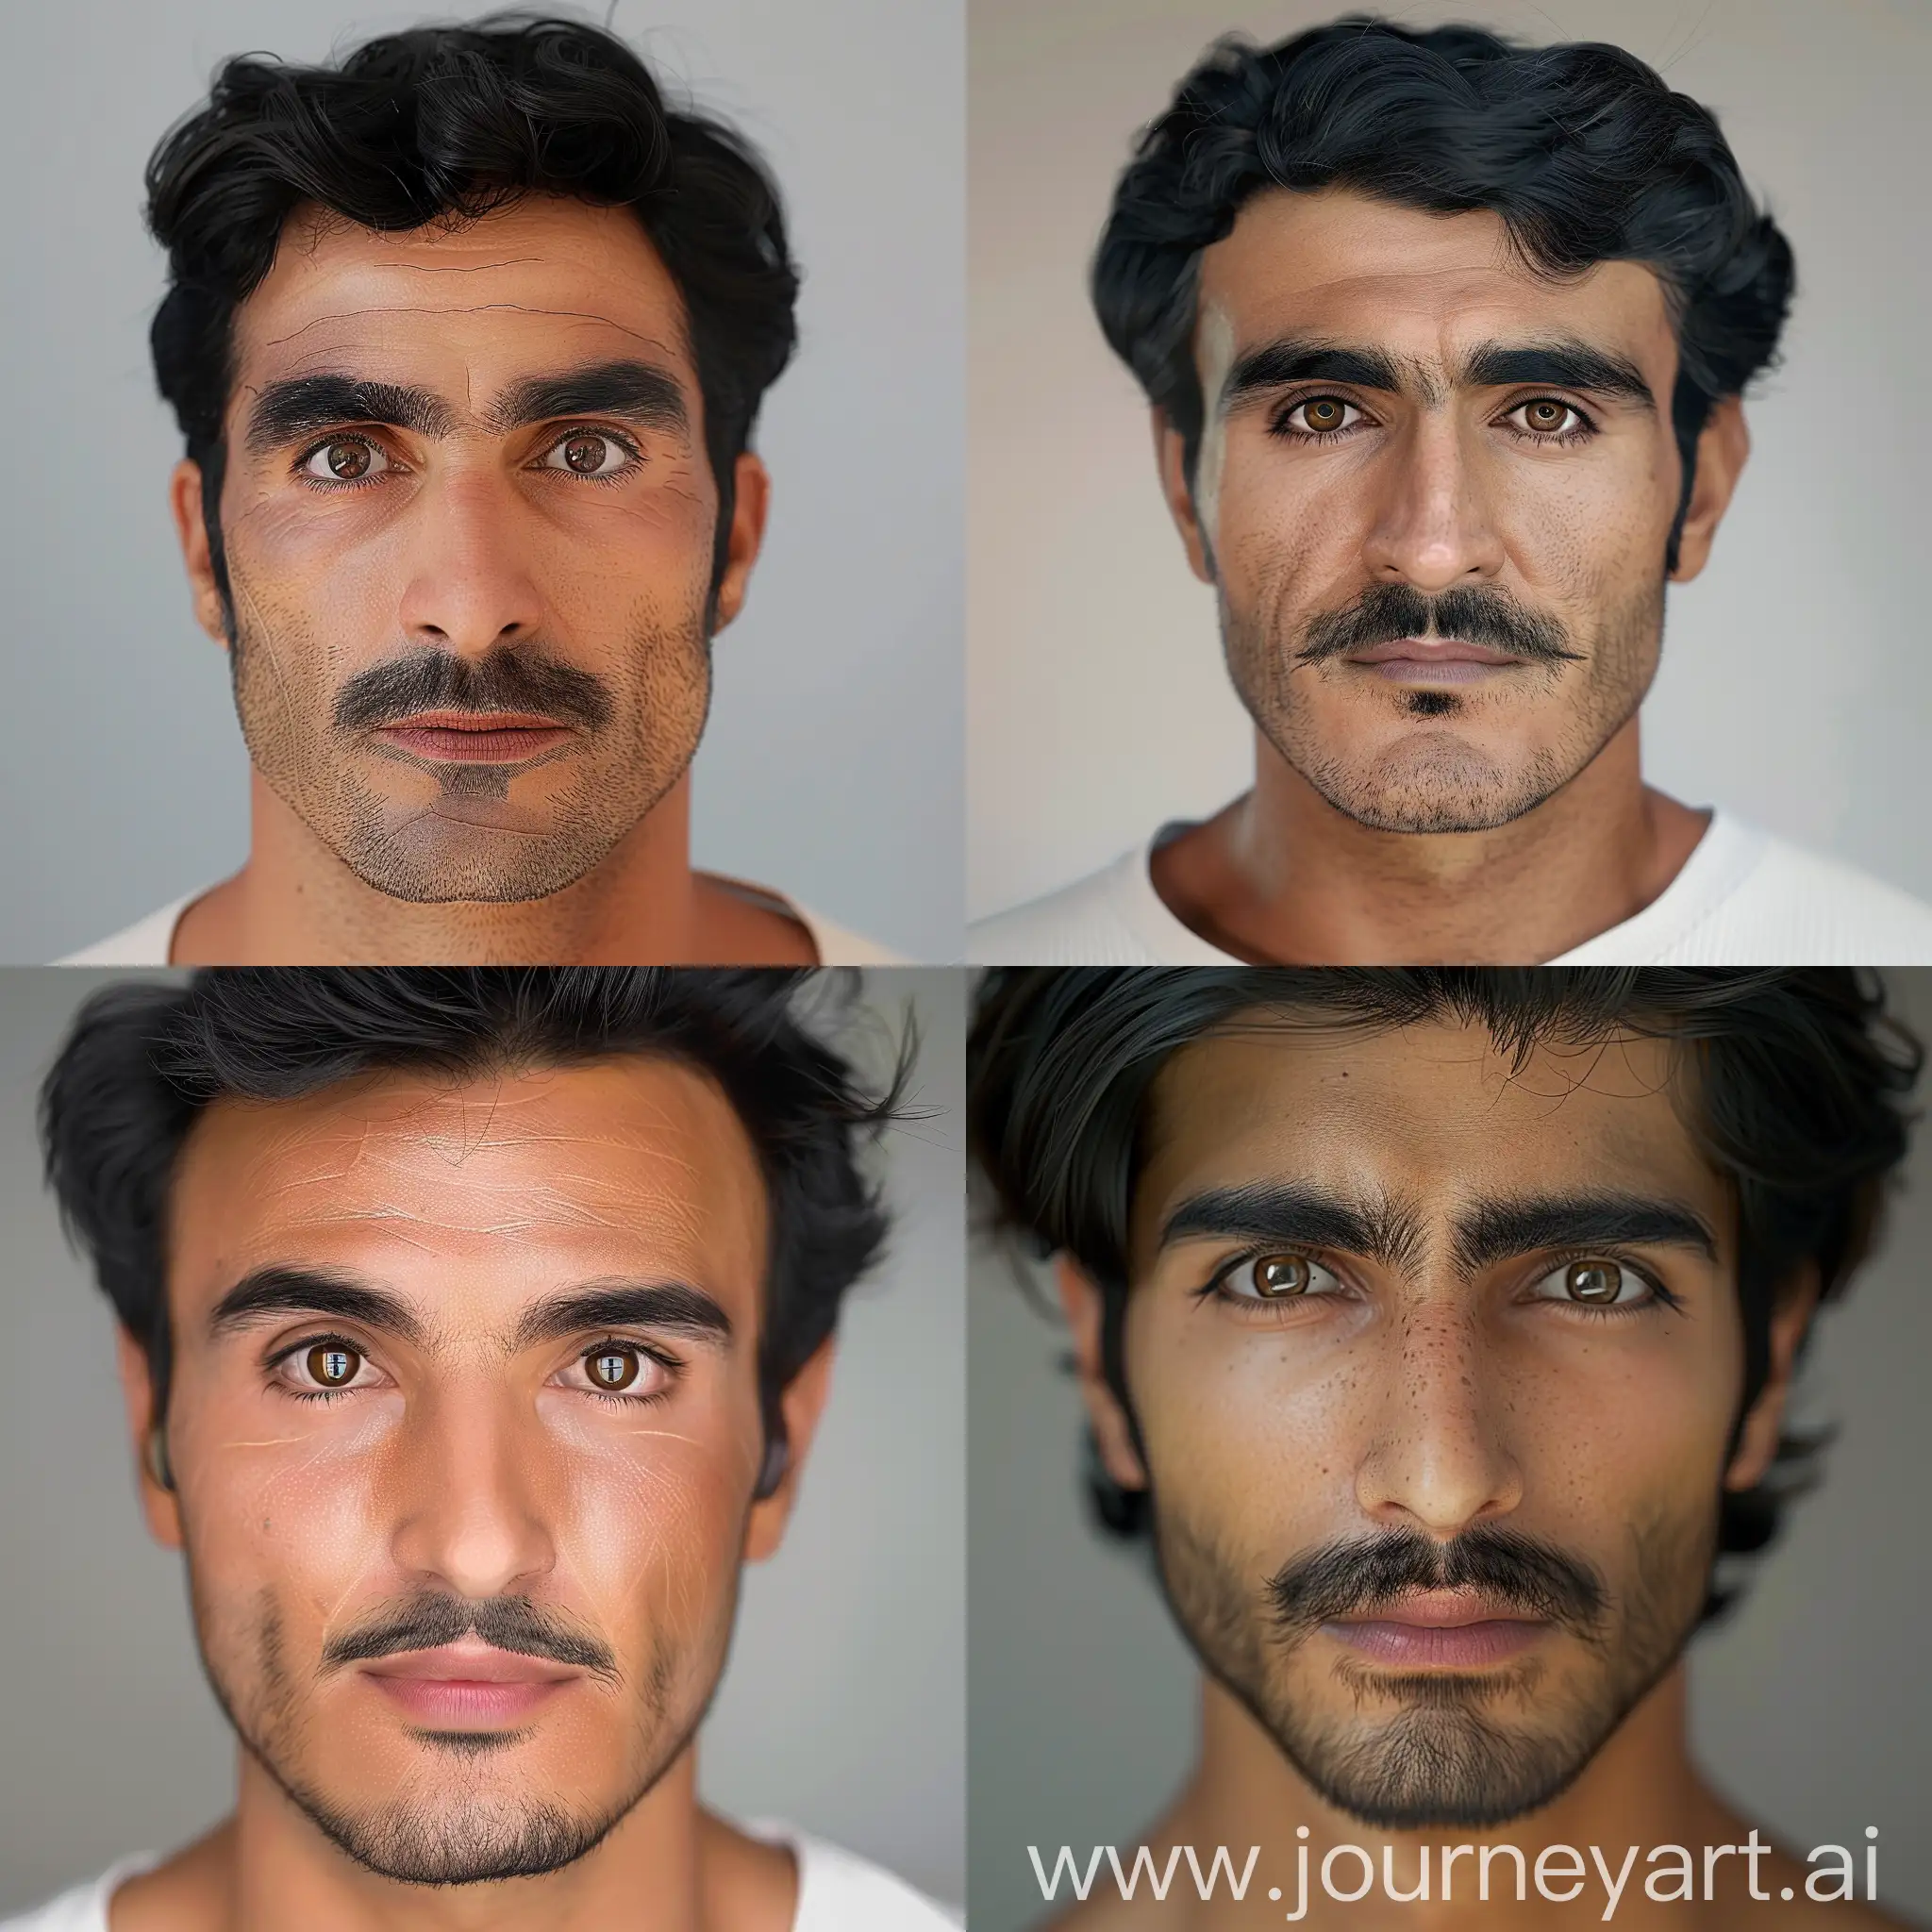 Plastic-Surgeon-in-Dubai-Tanned-Iranian-Man-with-Black-Hair-and-Mustache